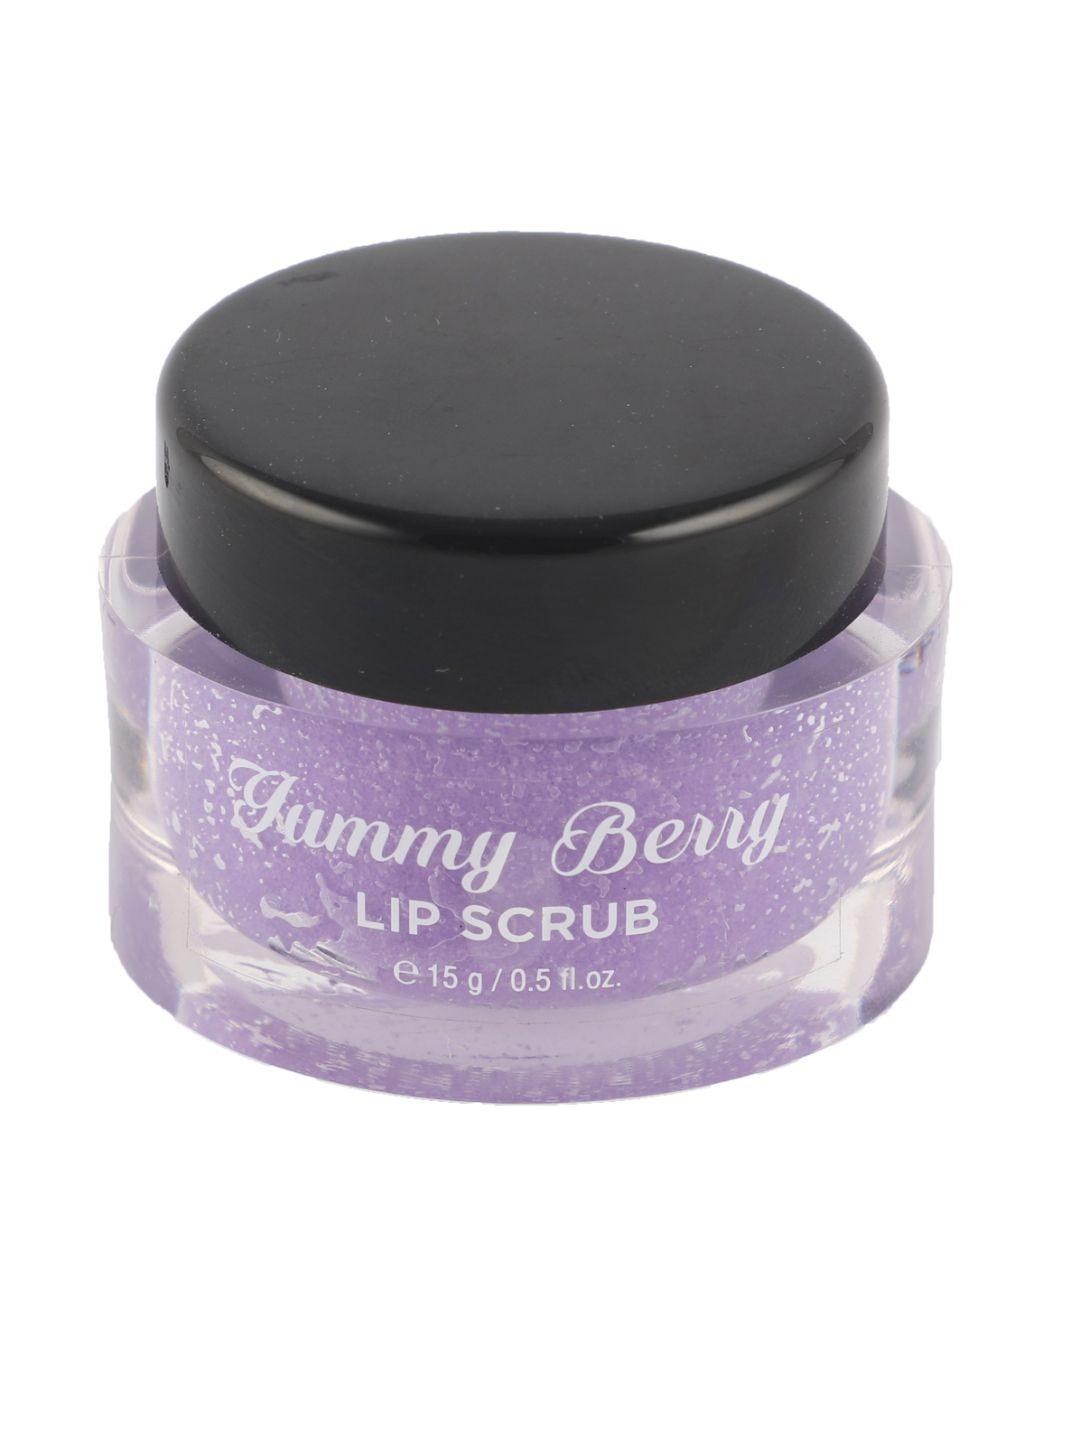 anour yummy berry lip scrub with jojoba oil & shea butter for soft & smooth lips - 15g